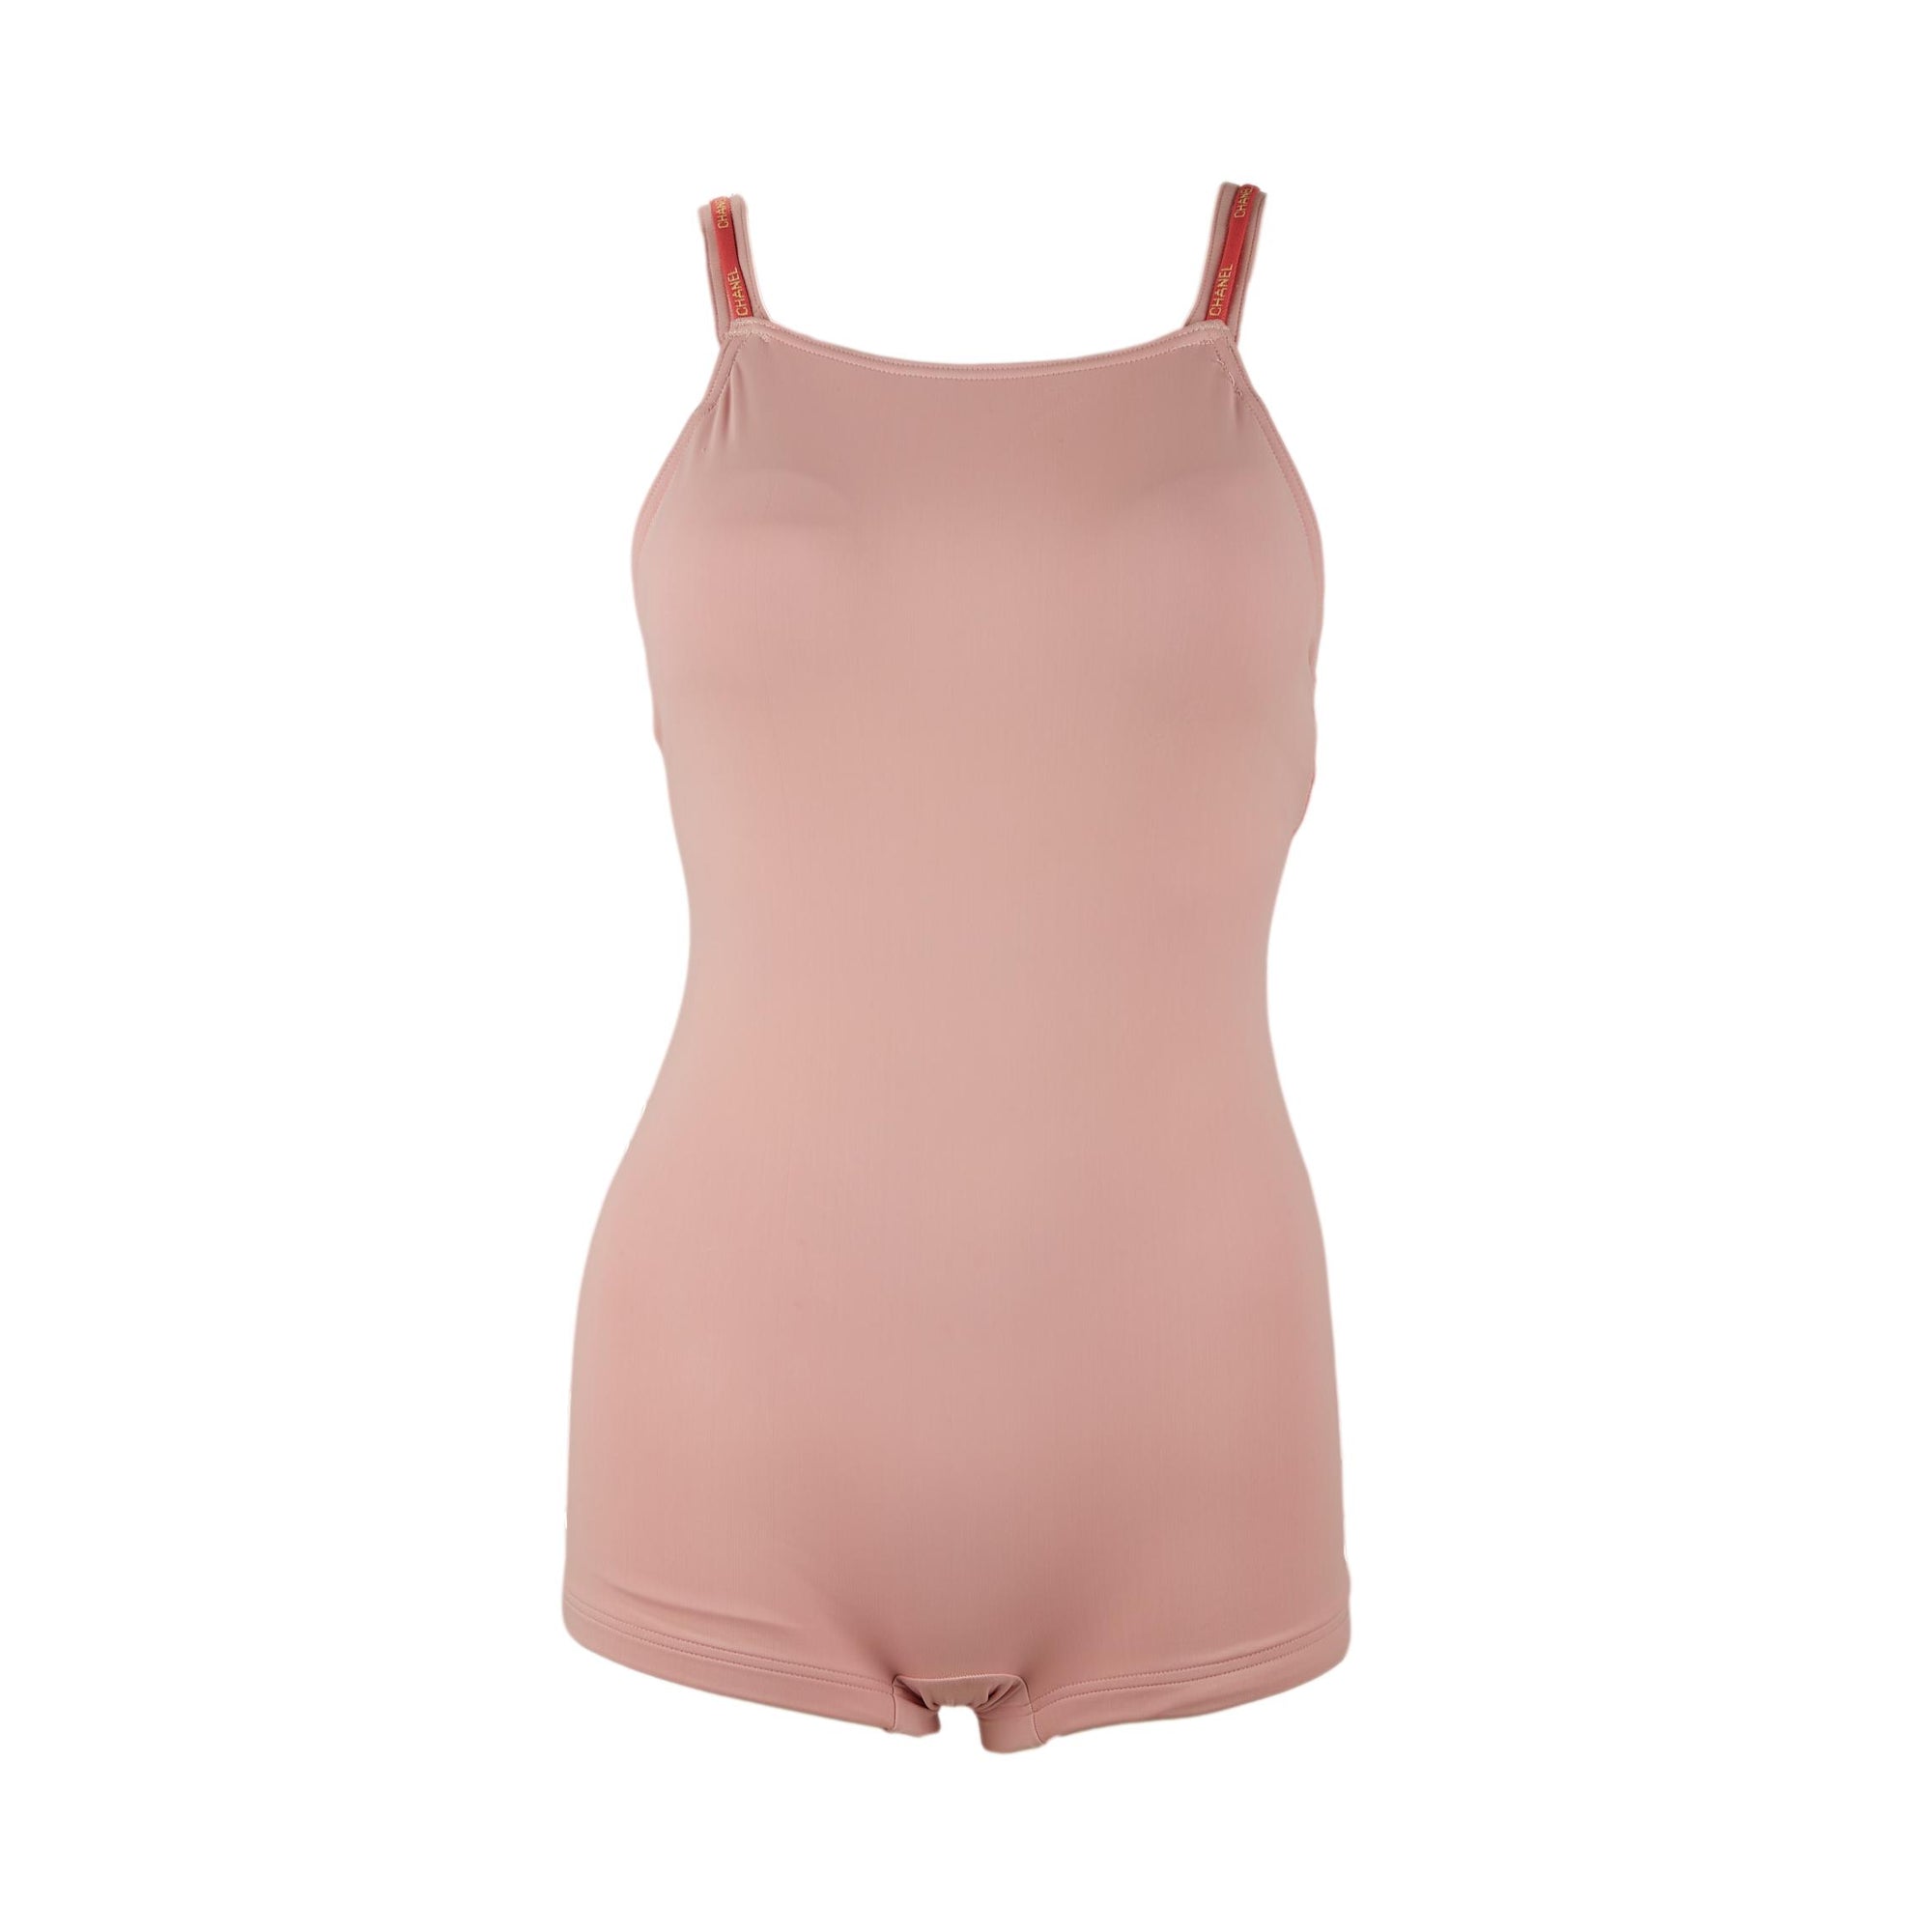 Chanel Baby Pink One Piece